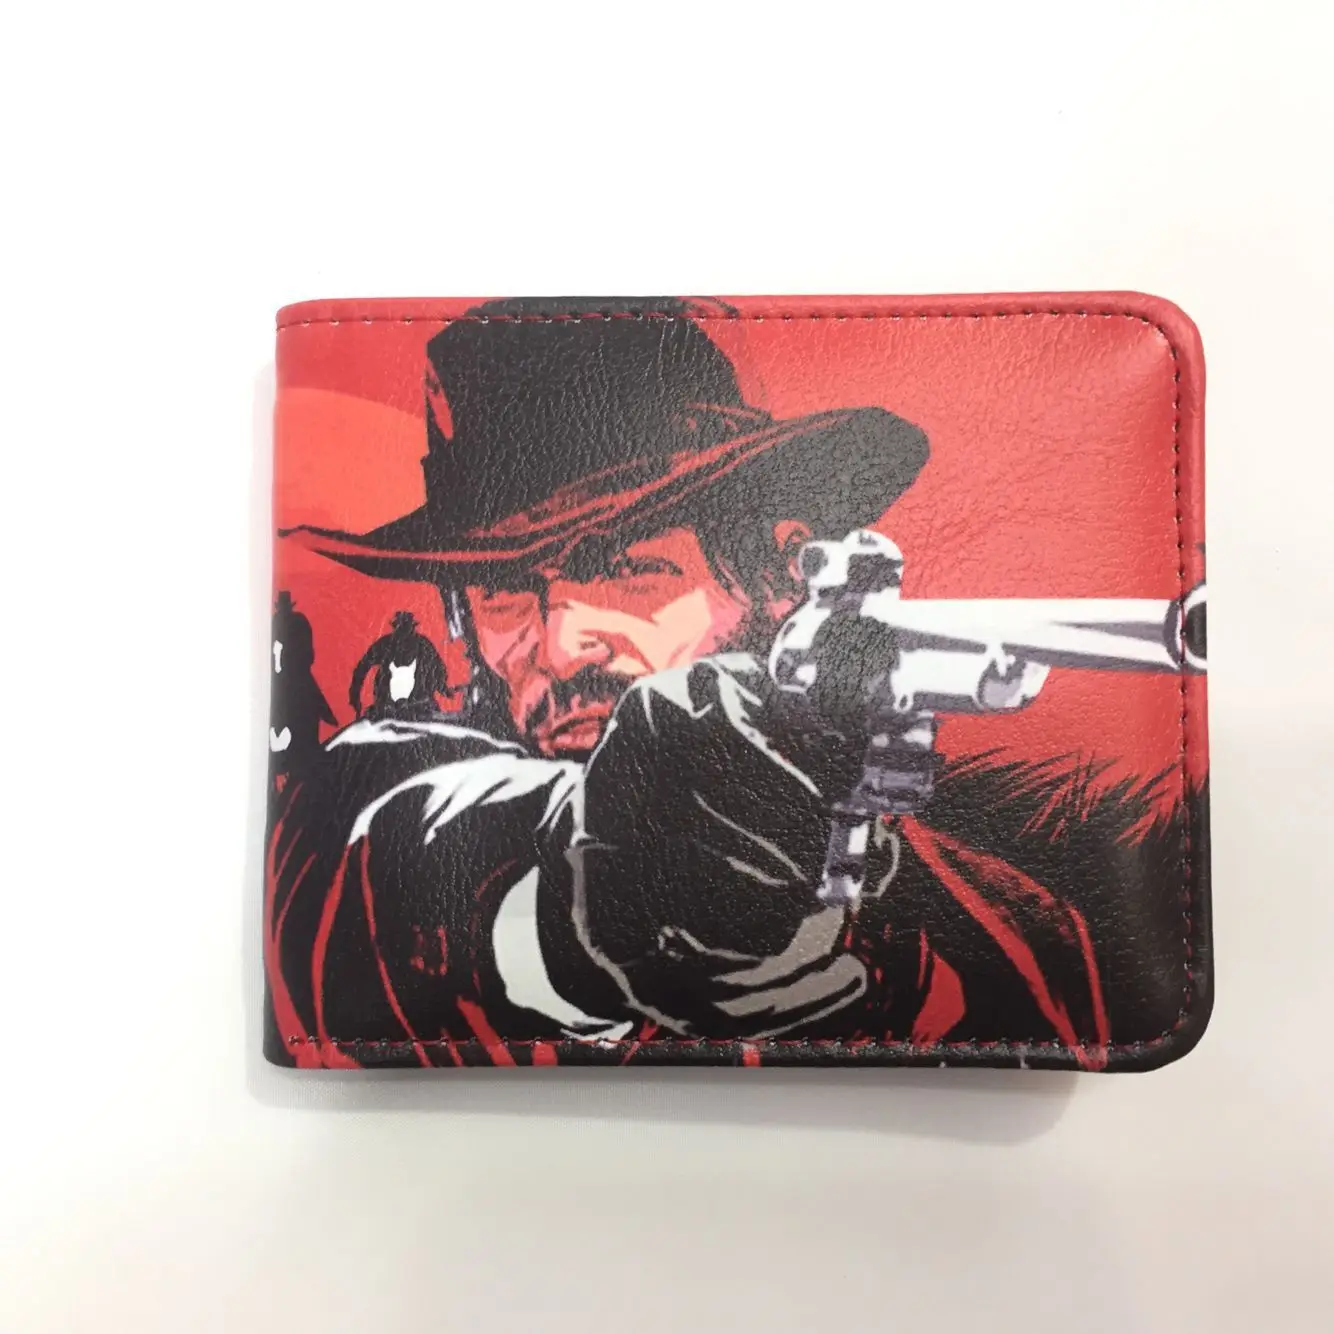 

Professional PU PVC Wallets Supply Game Purses Short Leather Coin Money Clips For Men Boys Girls Red Dead Redemption 2 Wallet